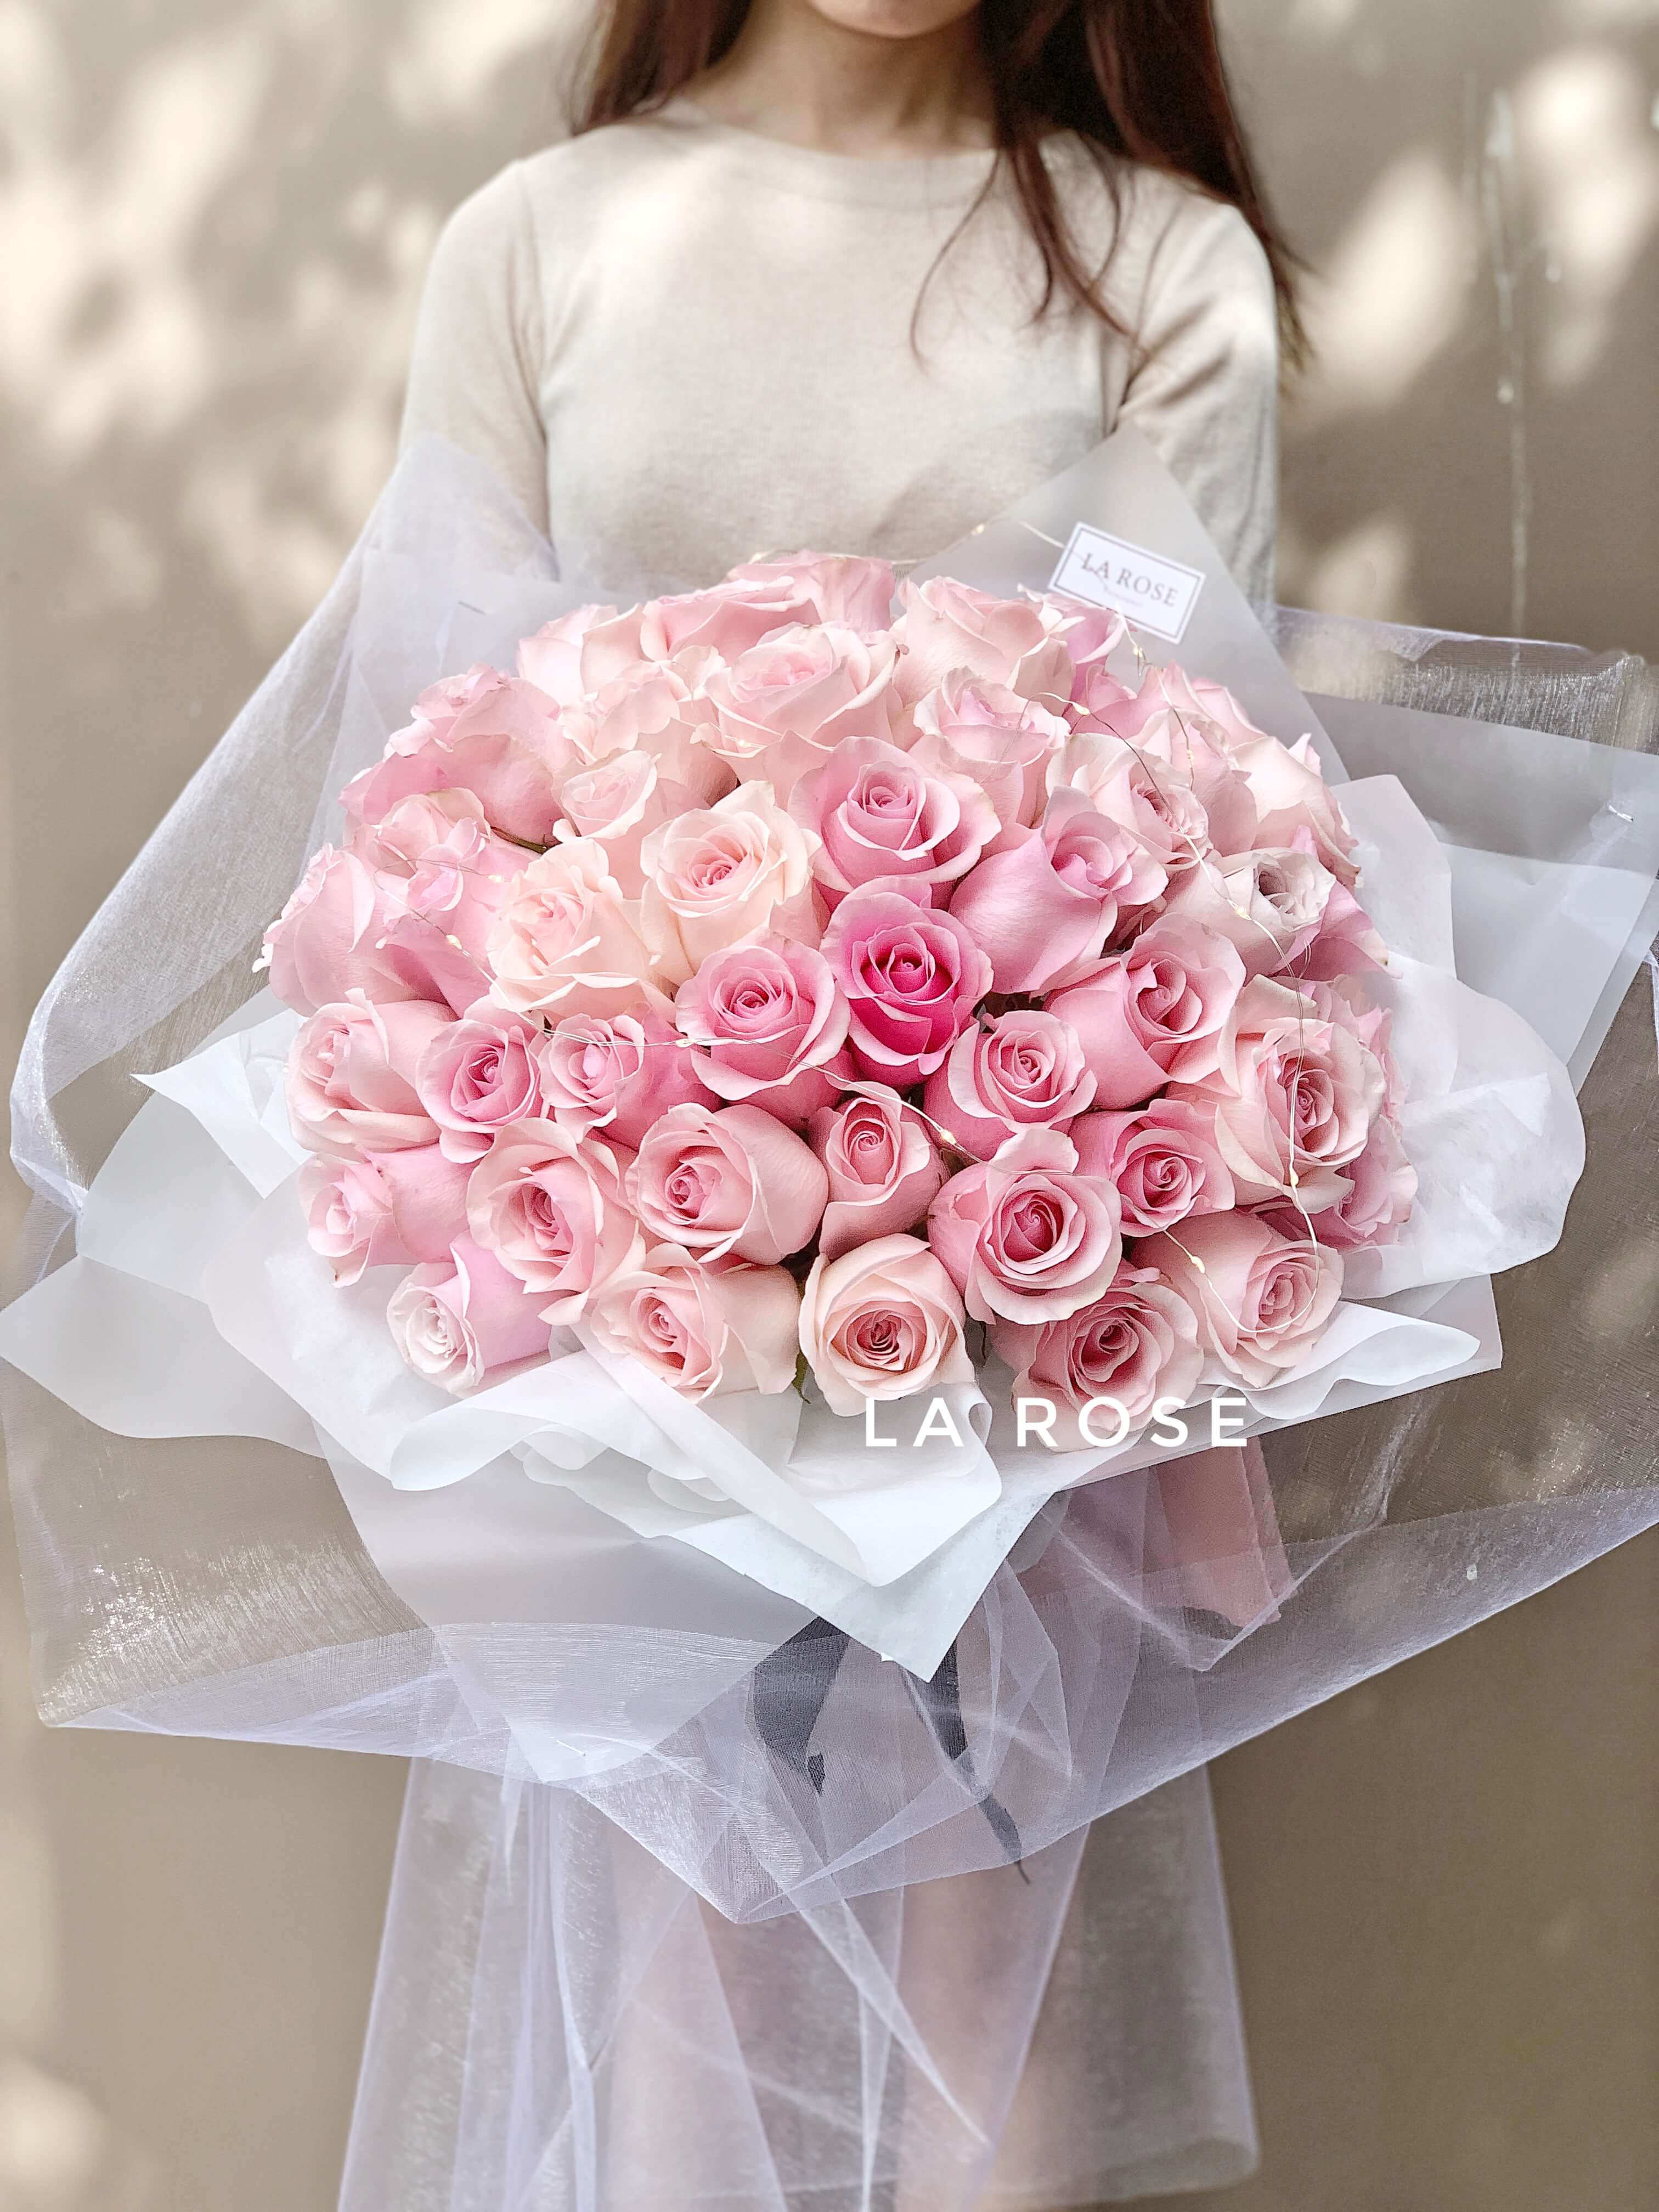 A girl holding a large La Rose Fleur bouquet with 51 pink flowers